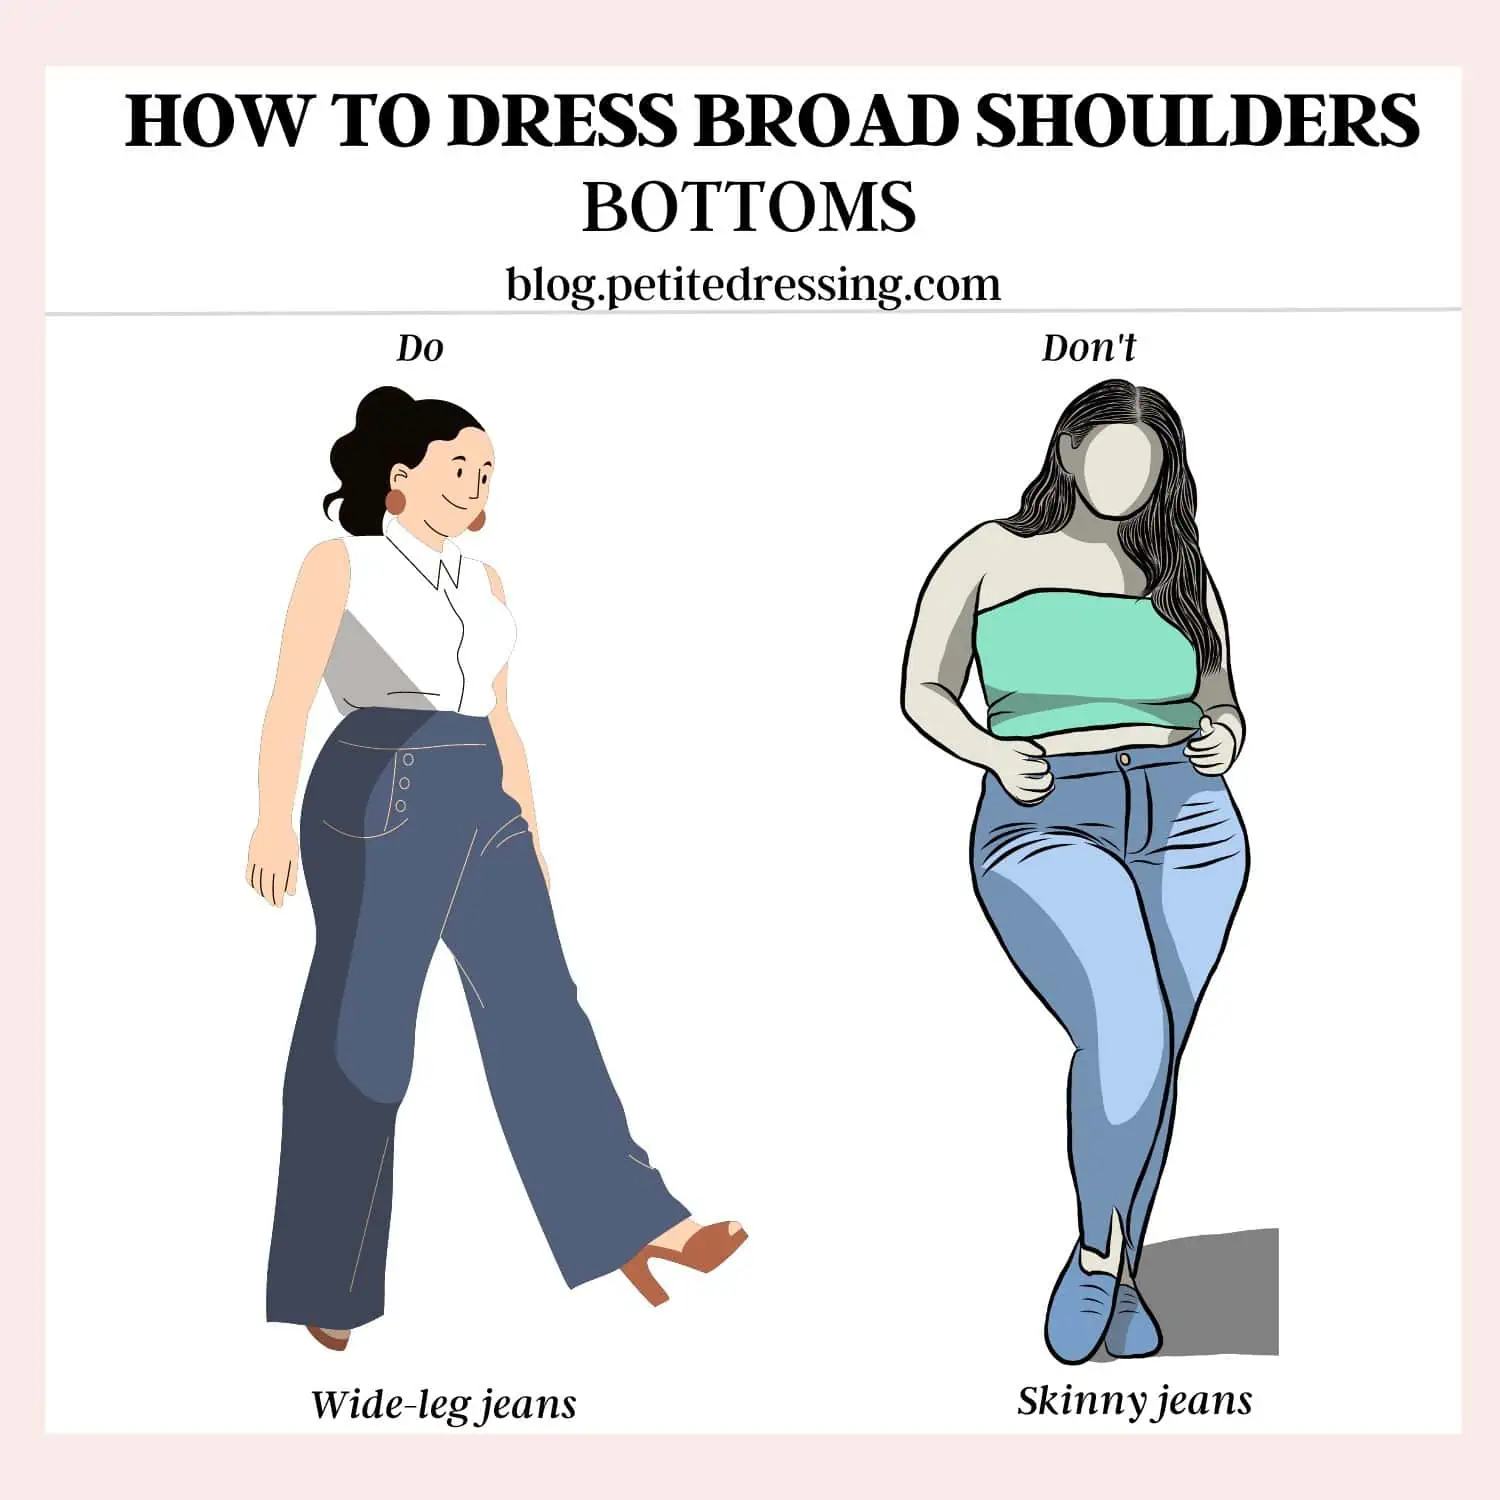 How to Kill the Broad Shoulders: Some Hot #Fashion #Tips to Look for -  Score upon fit and flares